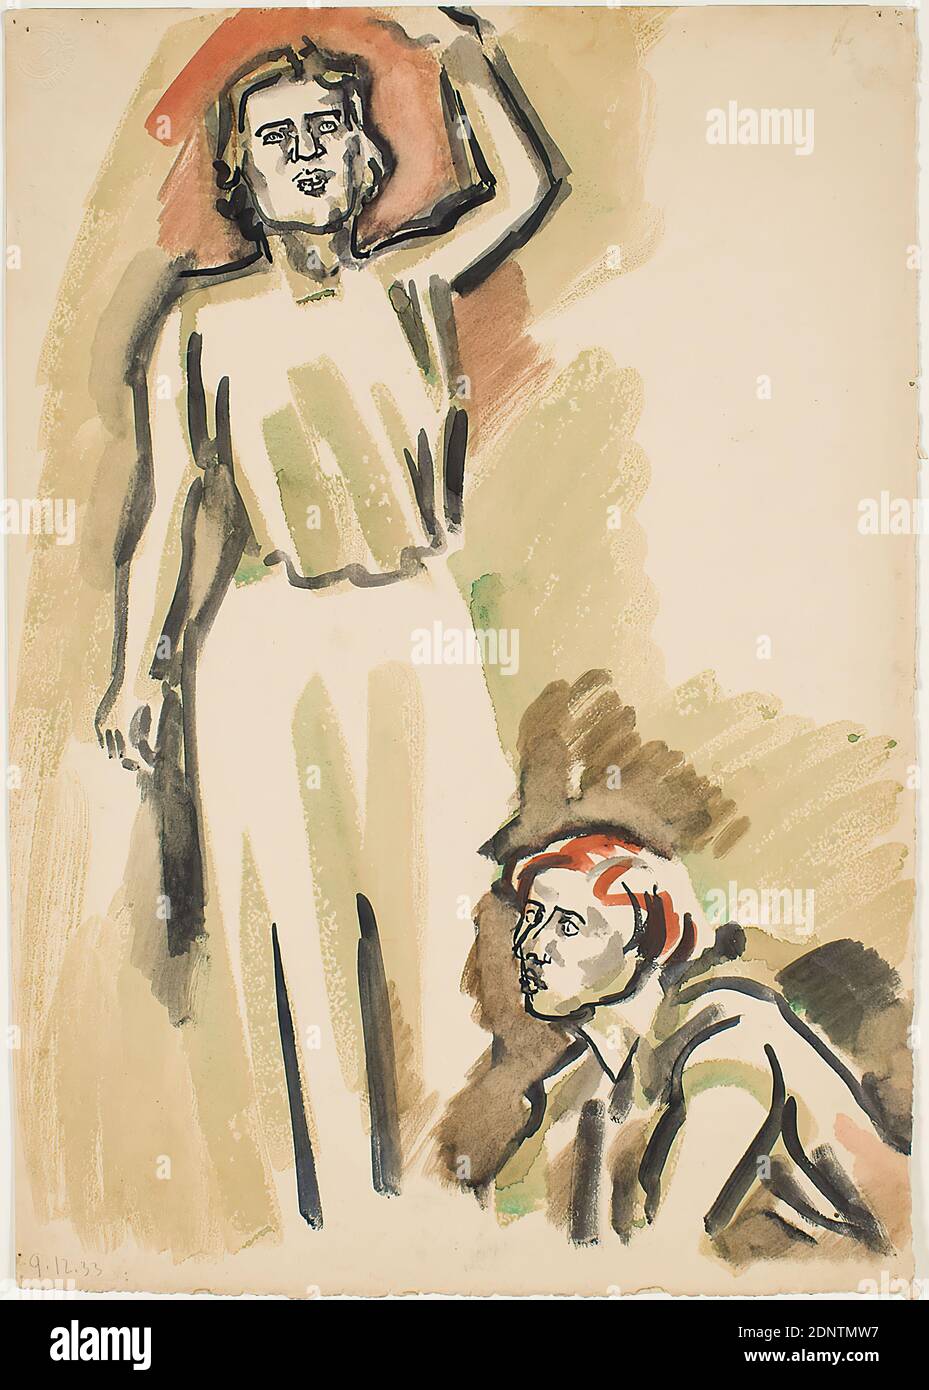 Gustav Heinrich Wolff, Zwei Frauen, Non-covering watercolor, cardboard, watercolor on cardboard, Total: height: 51.3 cm; width: 35.7 cm, dated: recto bottom left: with pencil: 9.12.33, free graphic, portrait, woman, standing figure, arm postures, gestures, Classic Modern Stock Photo